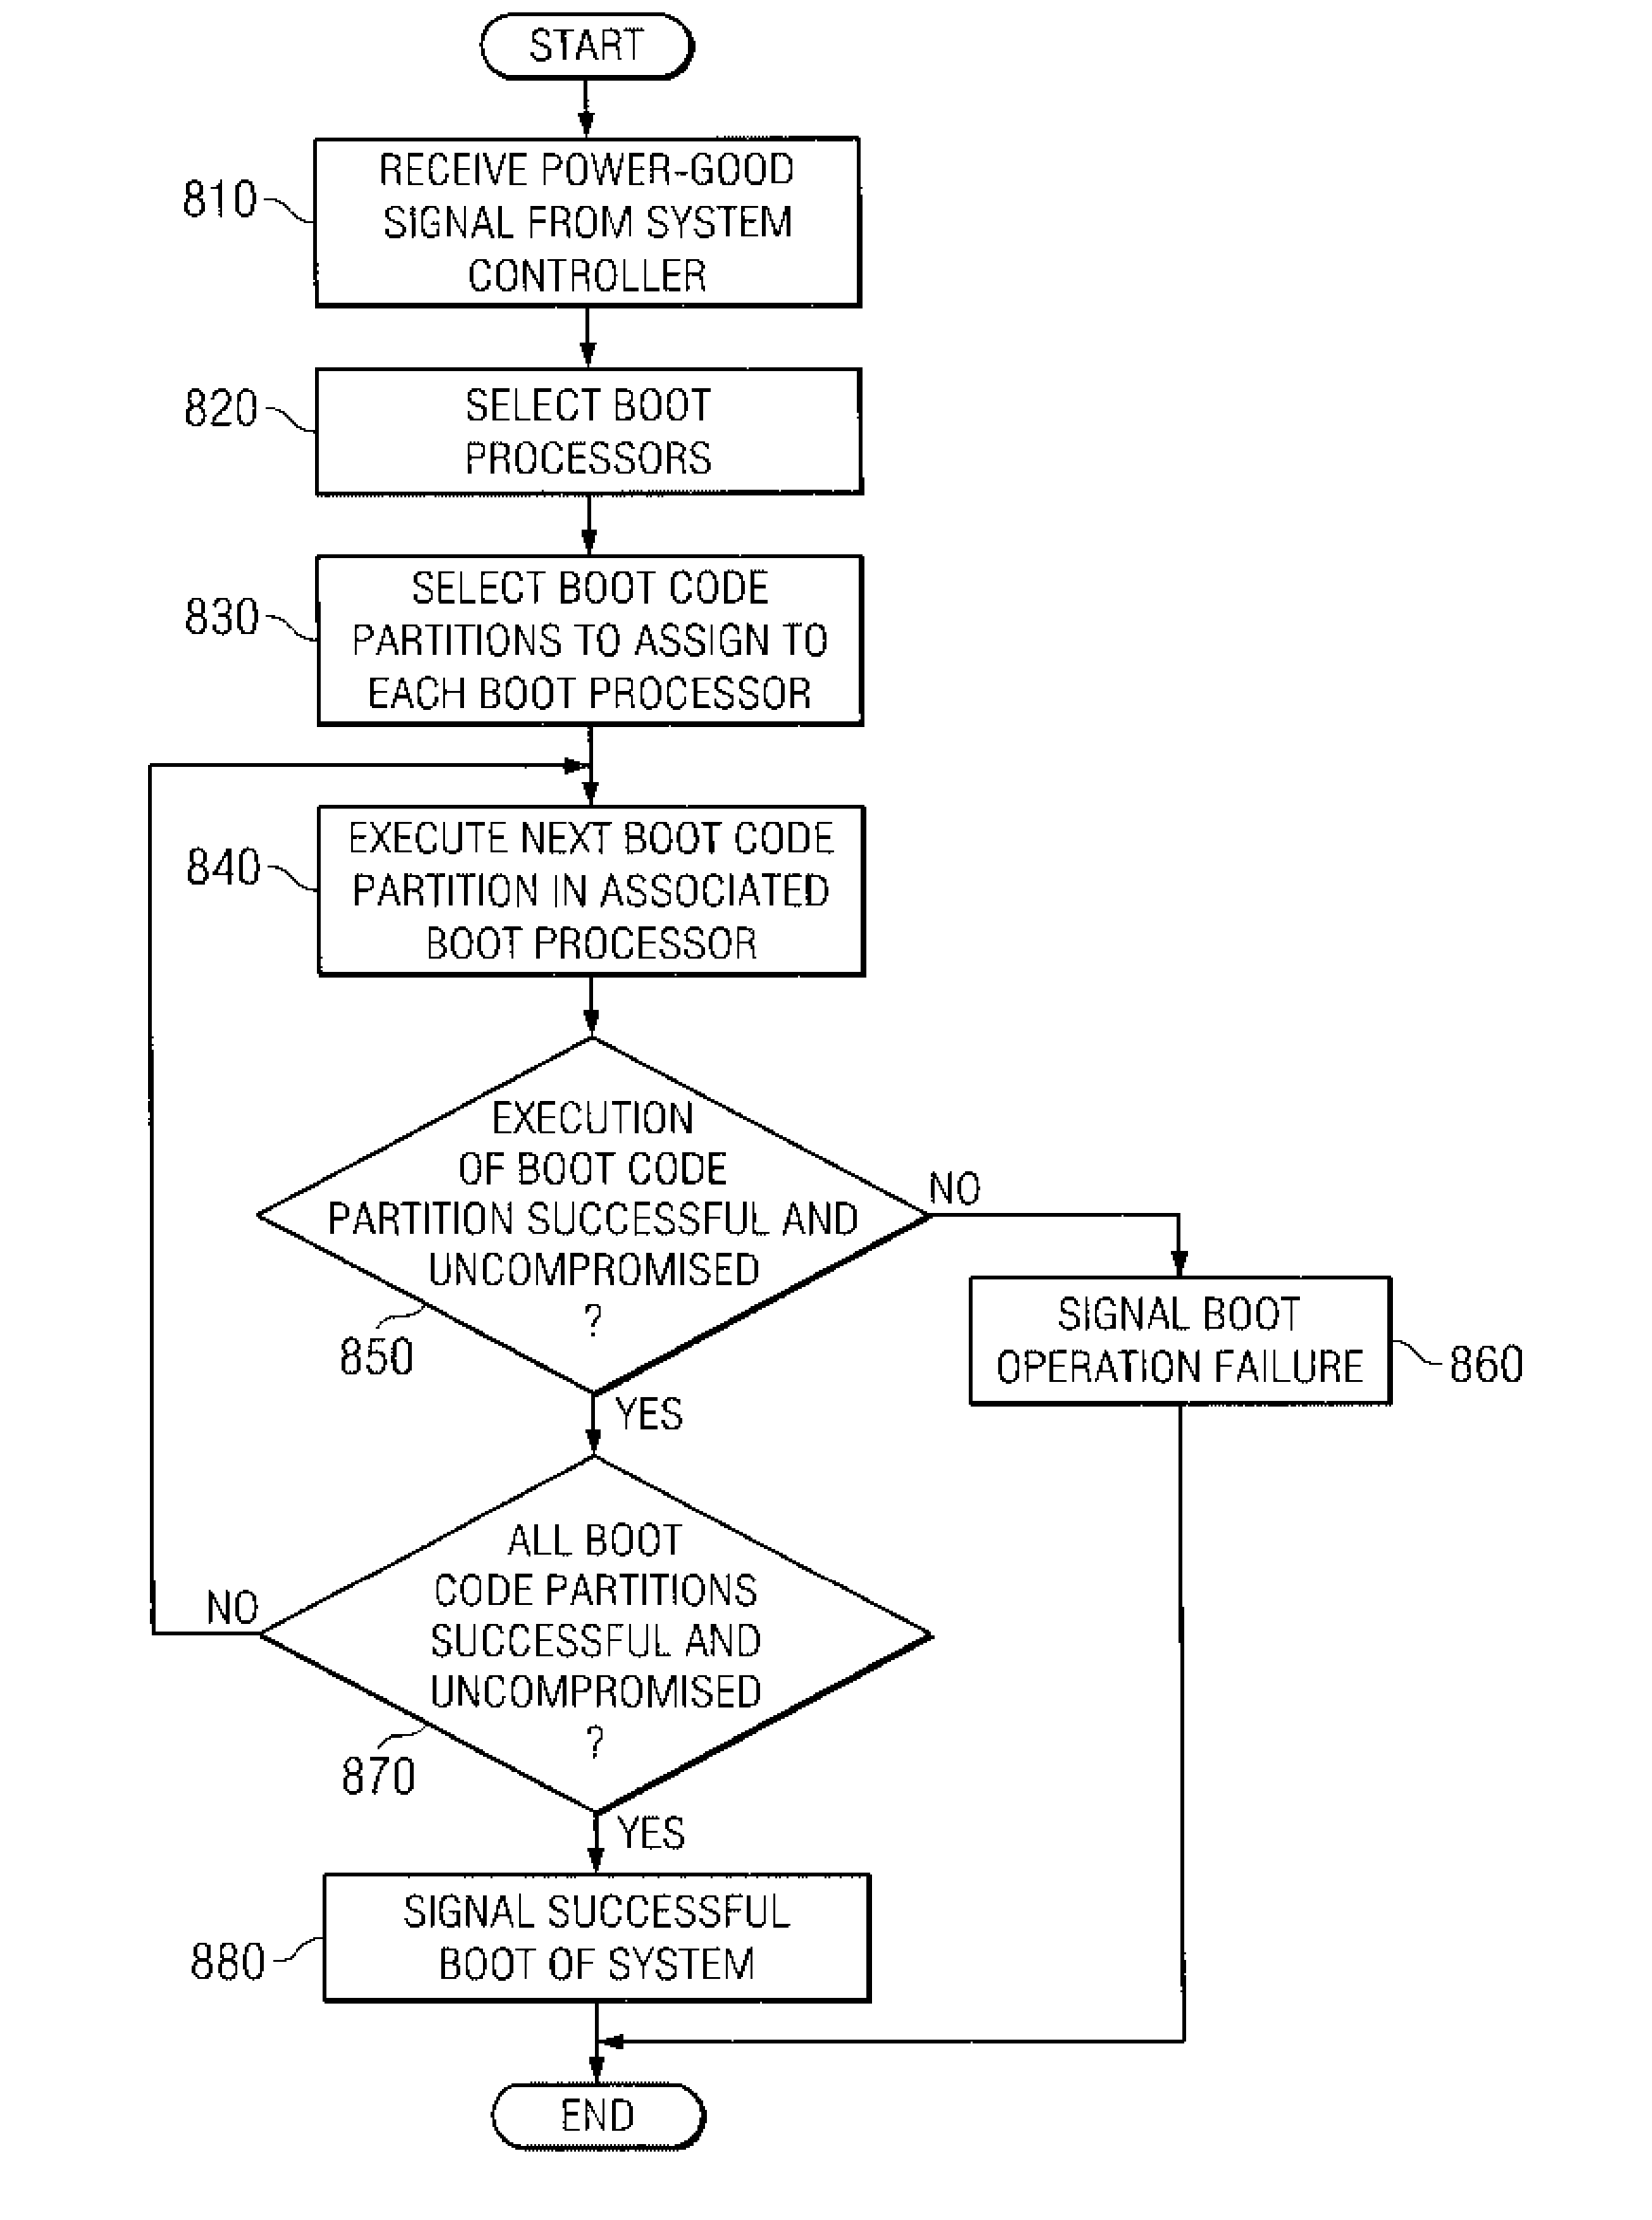 System and method for selecting a random processor to boot on a multiprocessor system